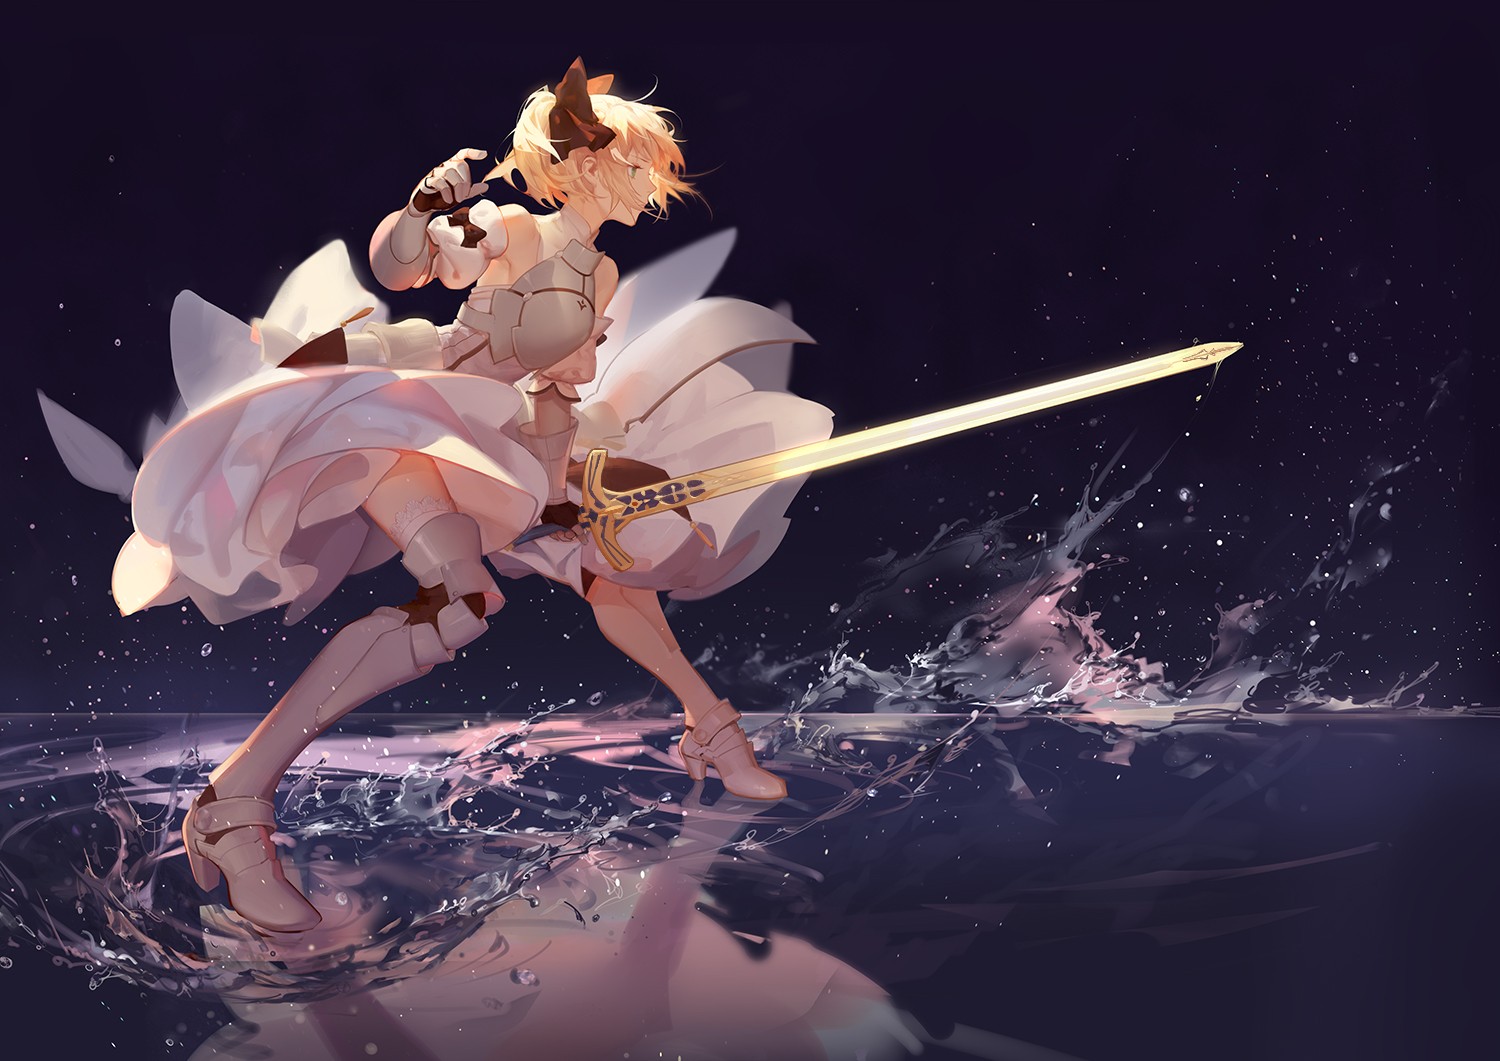 Anime 1500x1061 anime girls anime sword Fate series Saber Lily Saber ASK (artist) Pixiv fantasy art fantasy girl women with swords weapon dress reflection